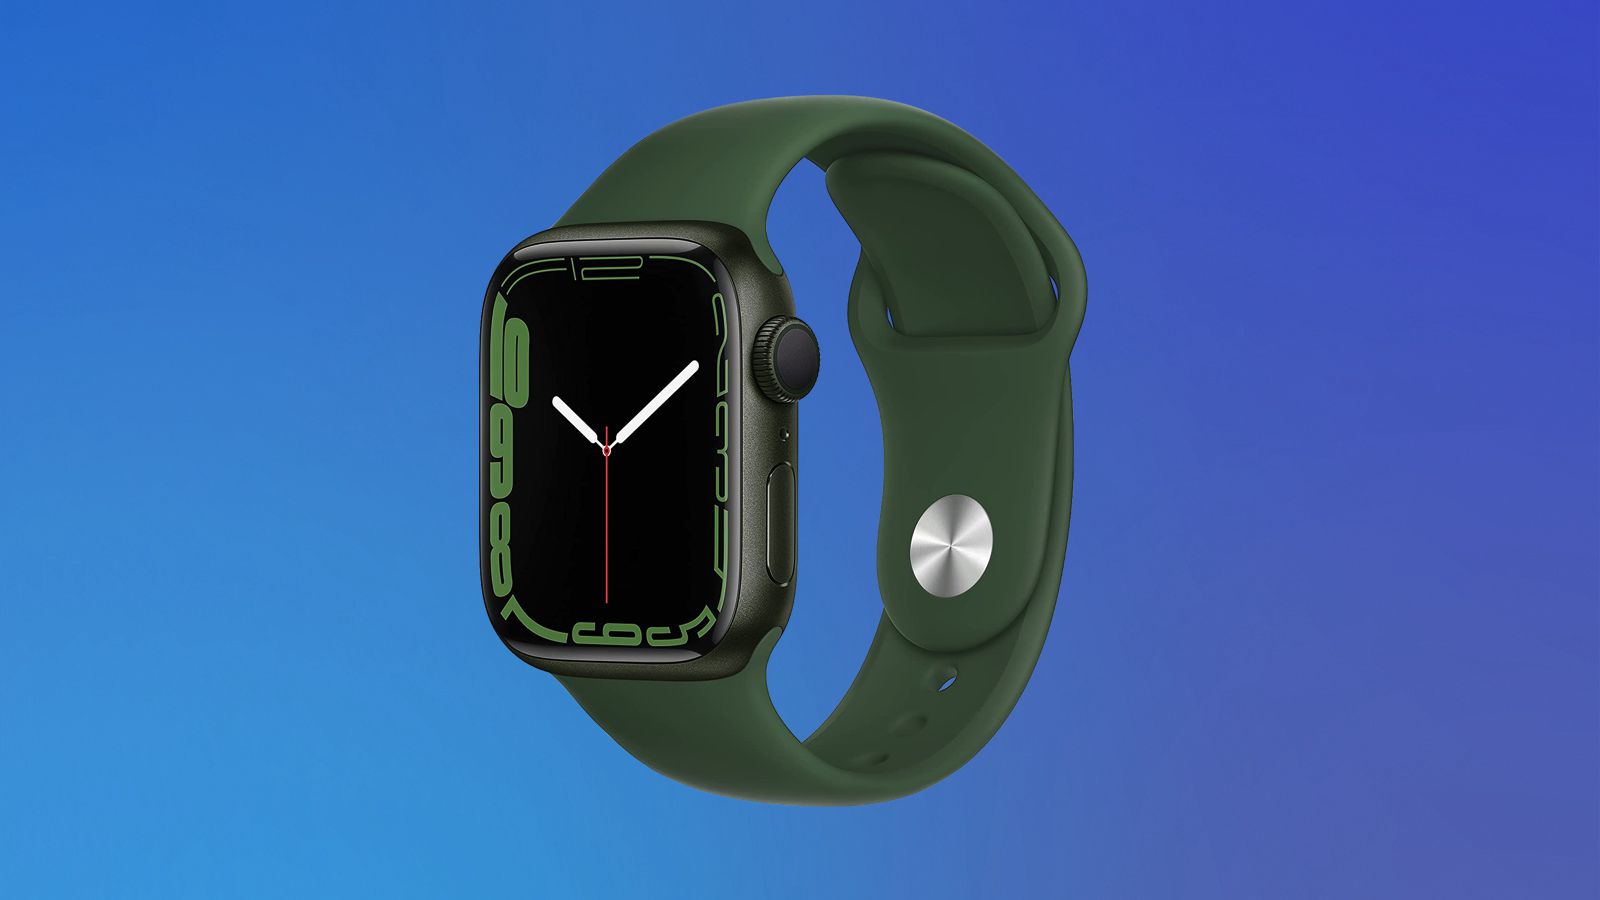 Deals: Apple Watch Series 7 Returns to All-Time Low Price of $279.99 ($119 Off) - MacRumors